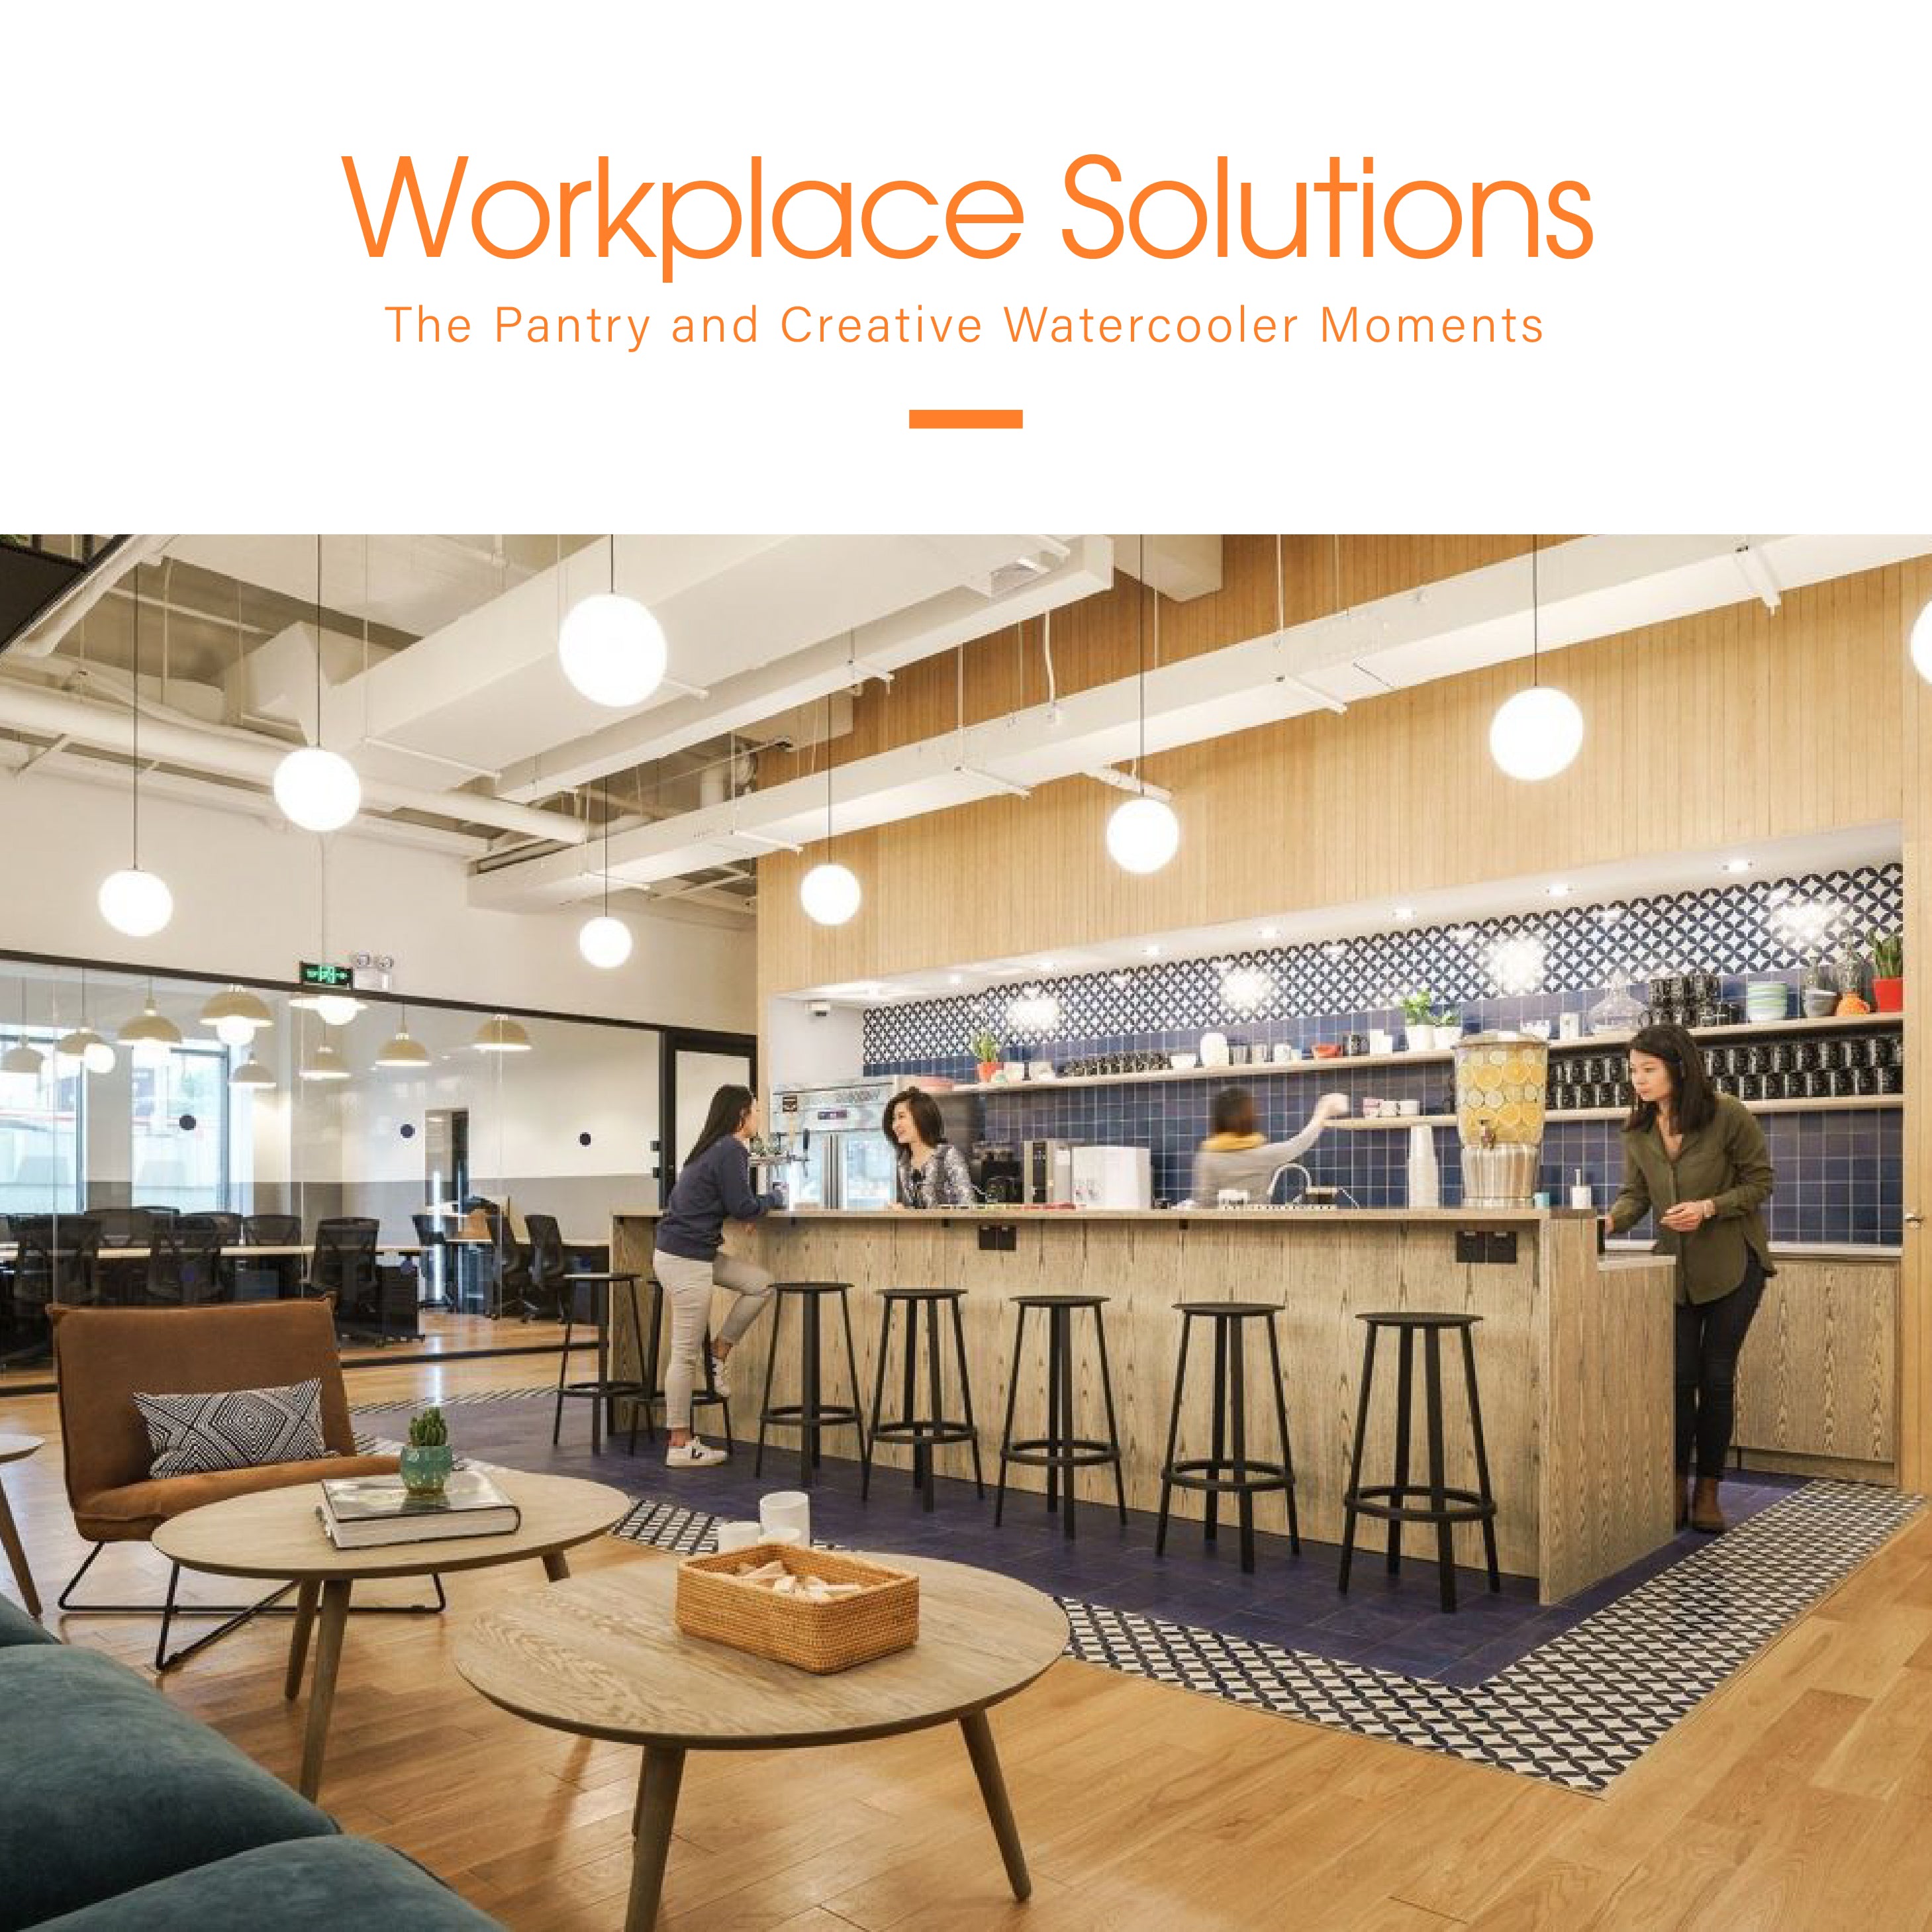 Workplace Solutions | The Pantry and creating Watercooler Moments